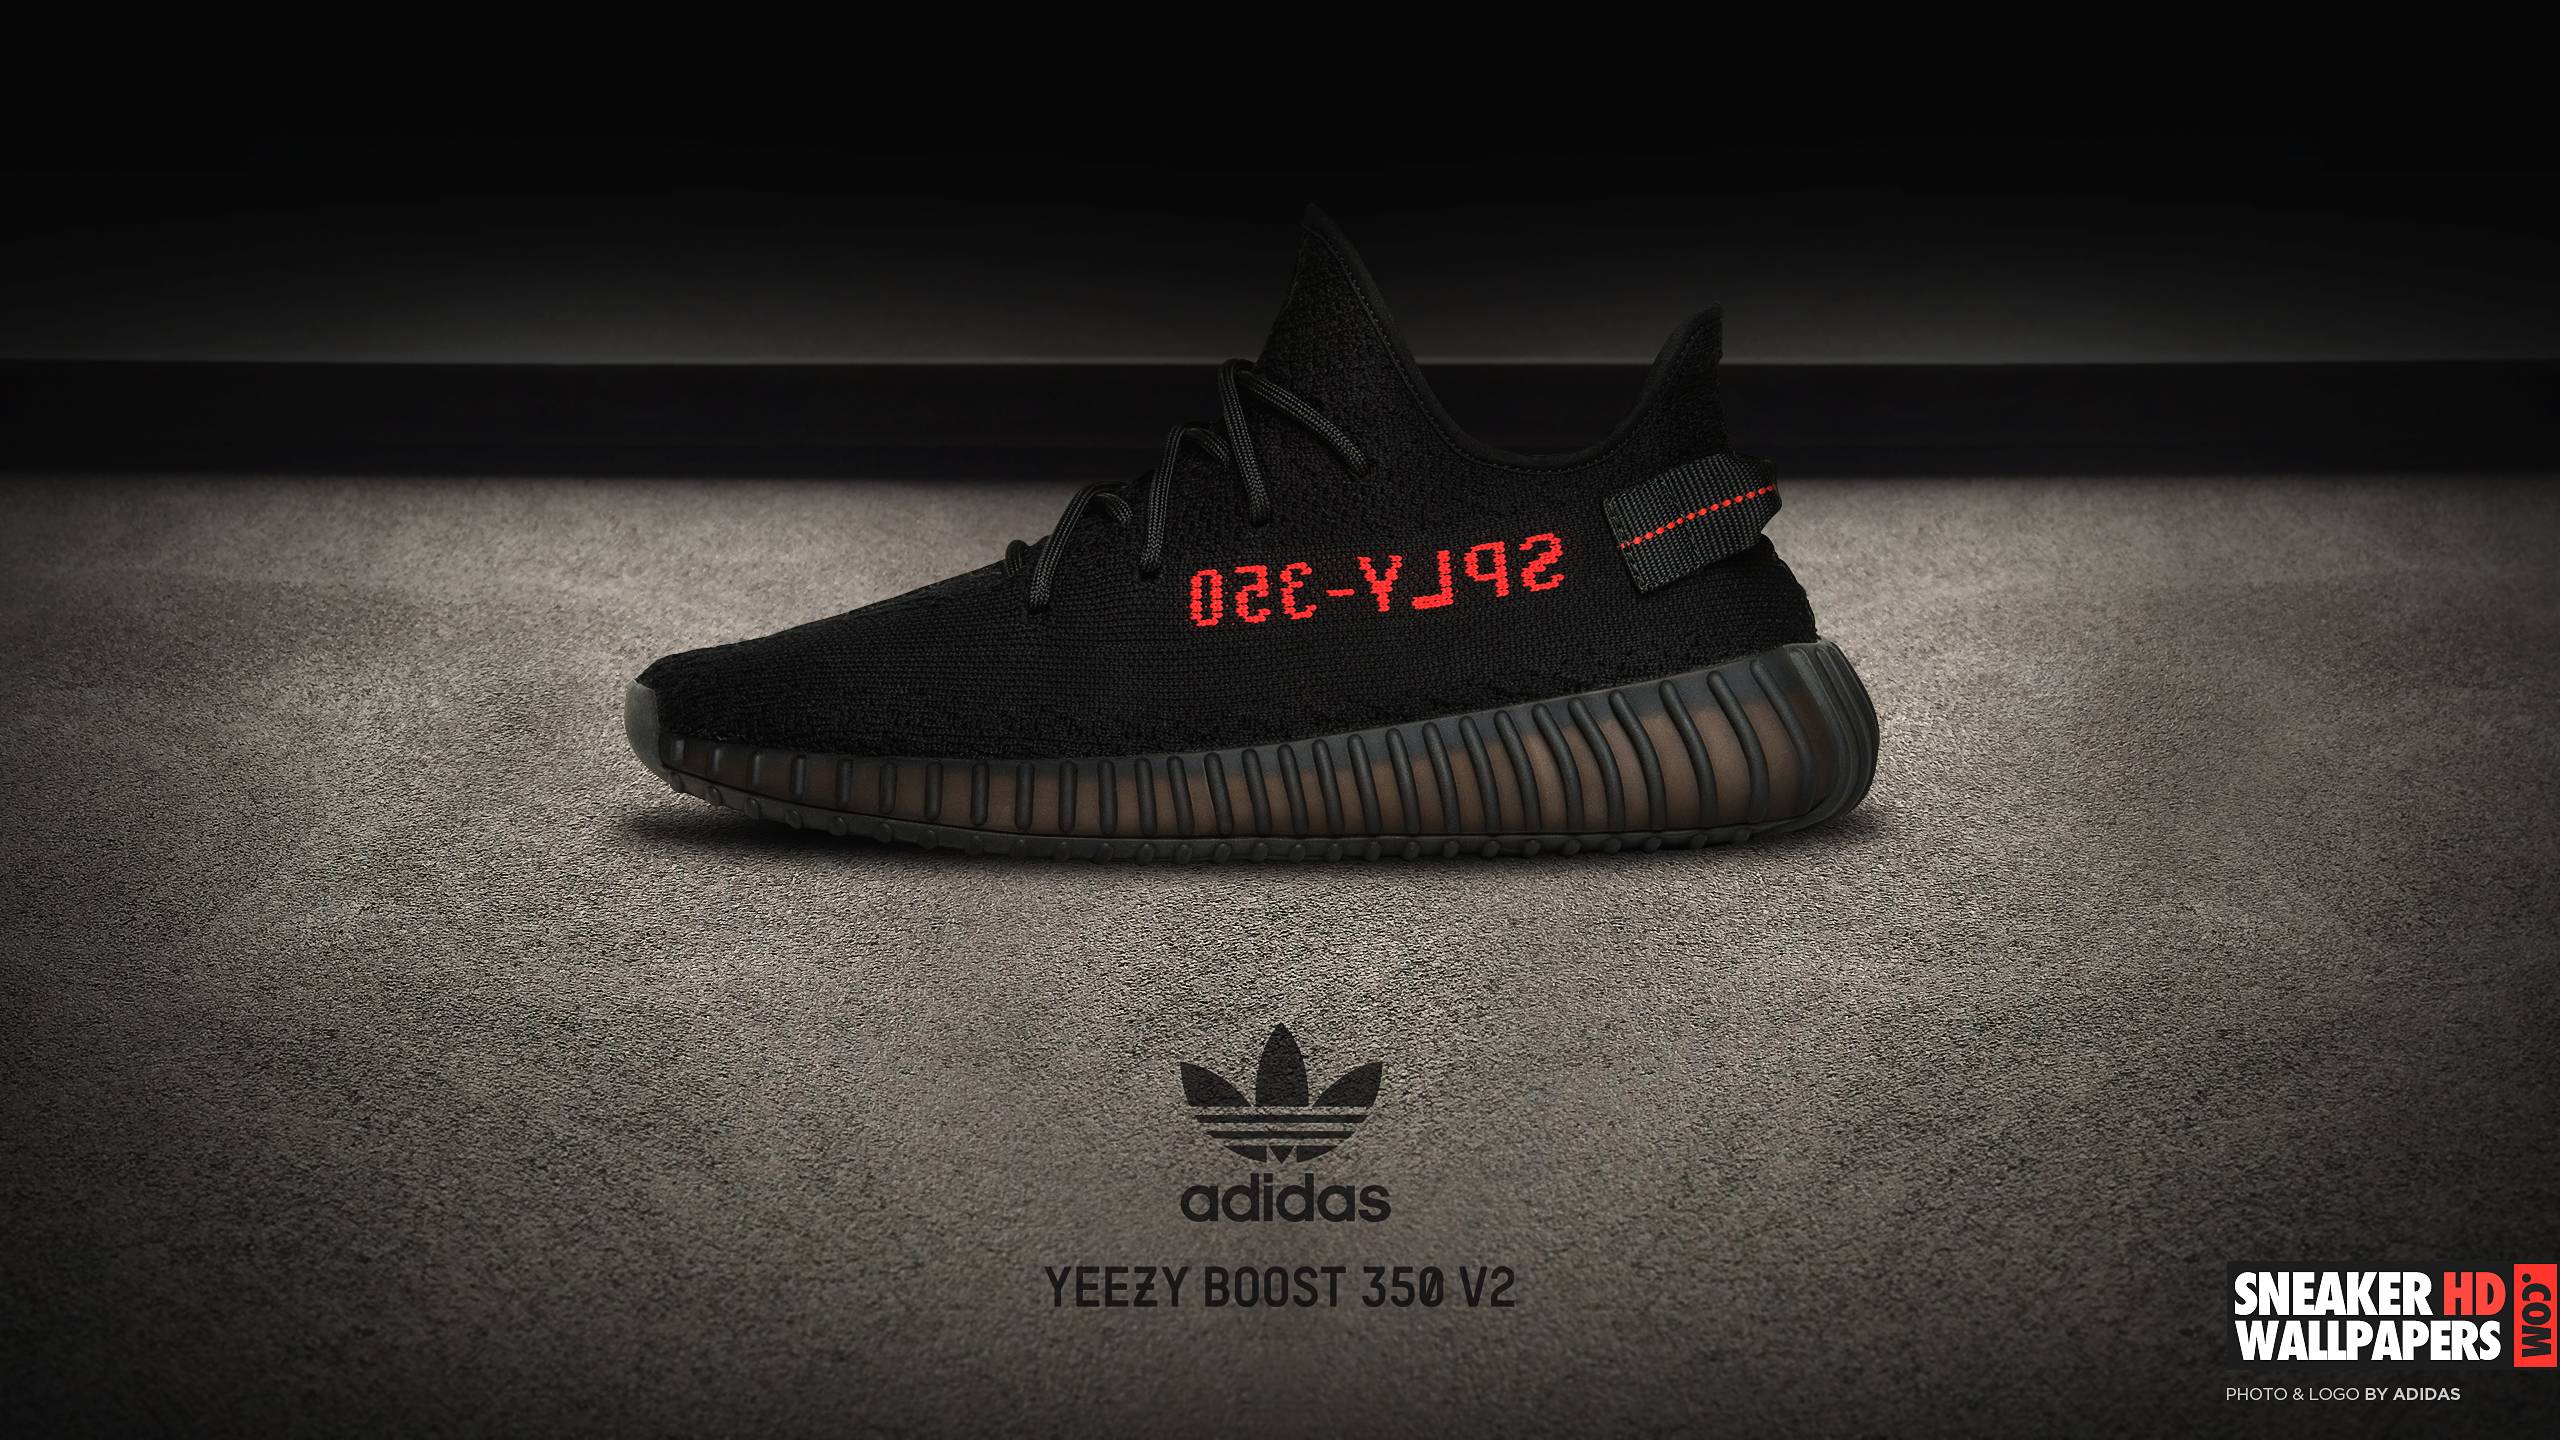 Yzy Logo - Best yeezy Wallpaper image. Yeezy, Fashion shoes, Workout shoes